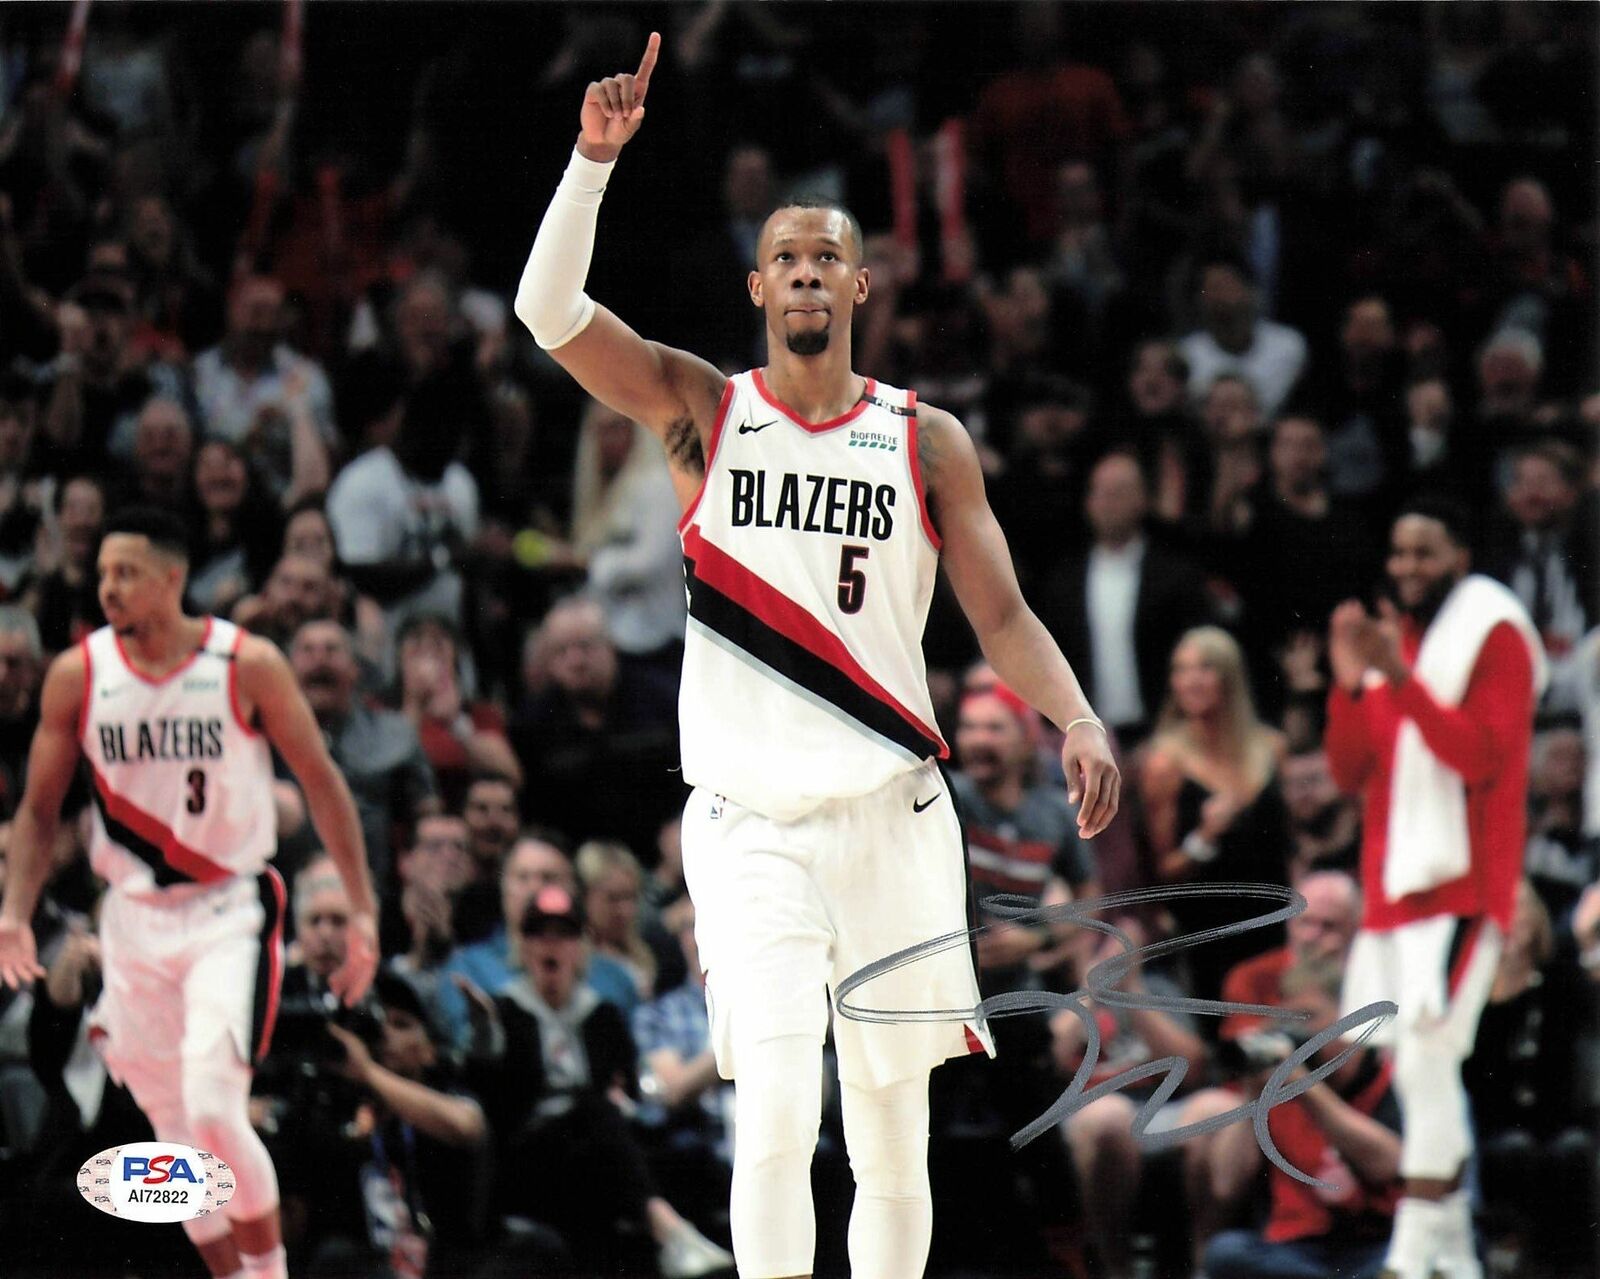 RODNEY HOOD signed 8x10 Photo Poster painting PSA/DNA Portland Trail Blazers autographed